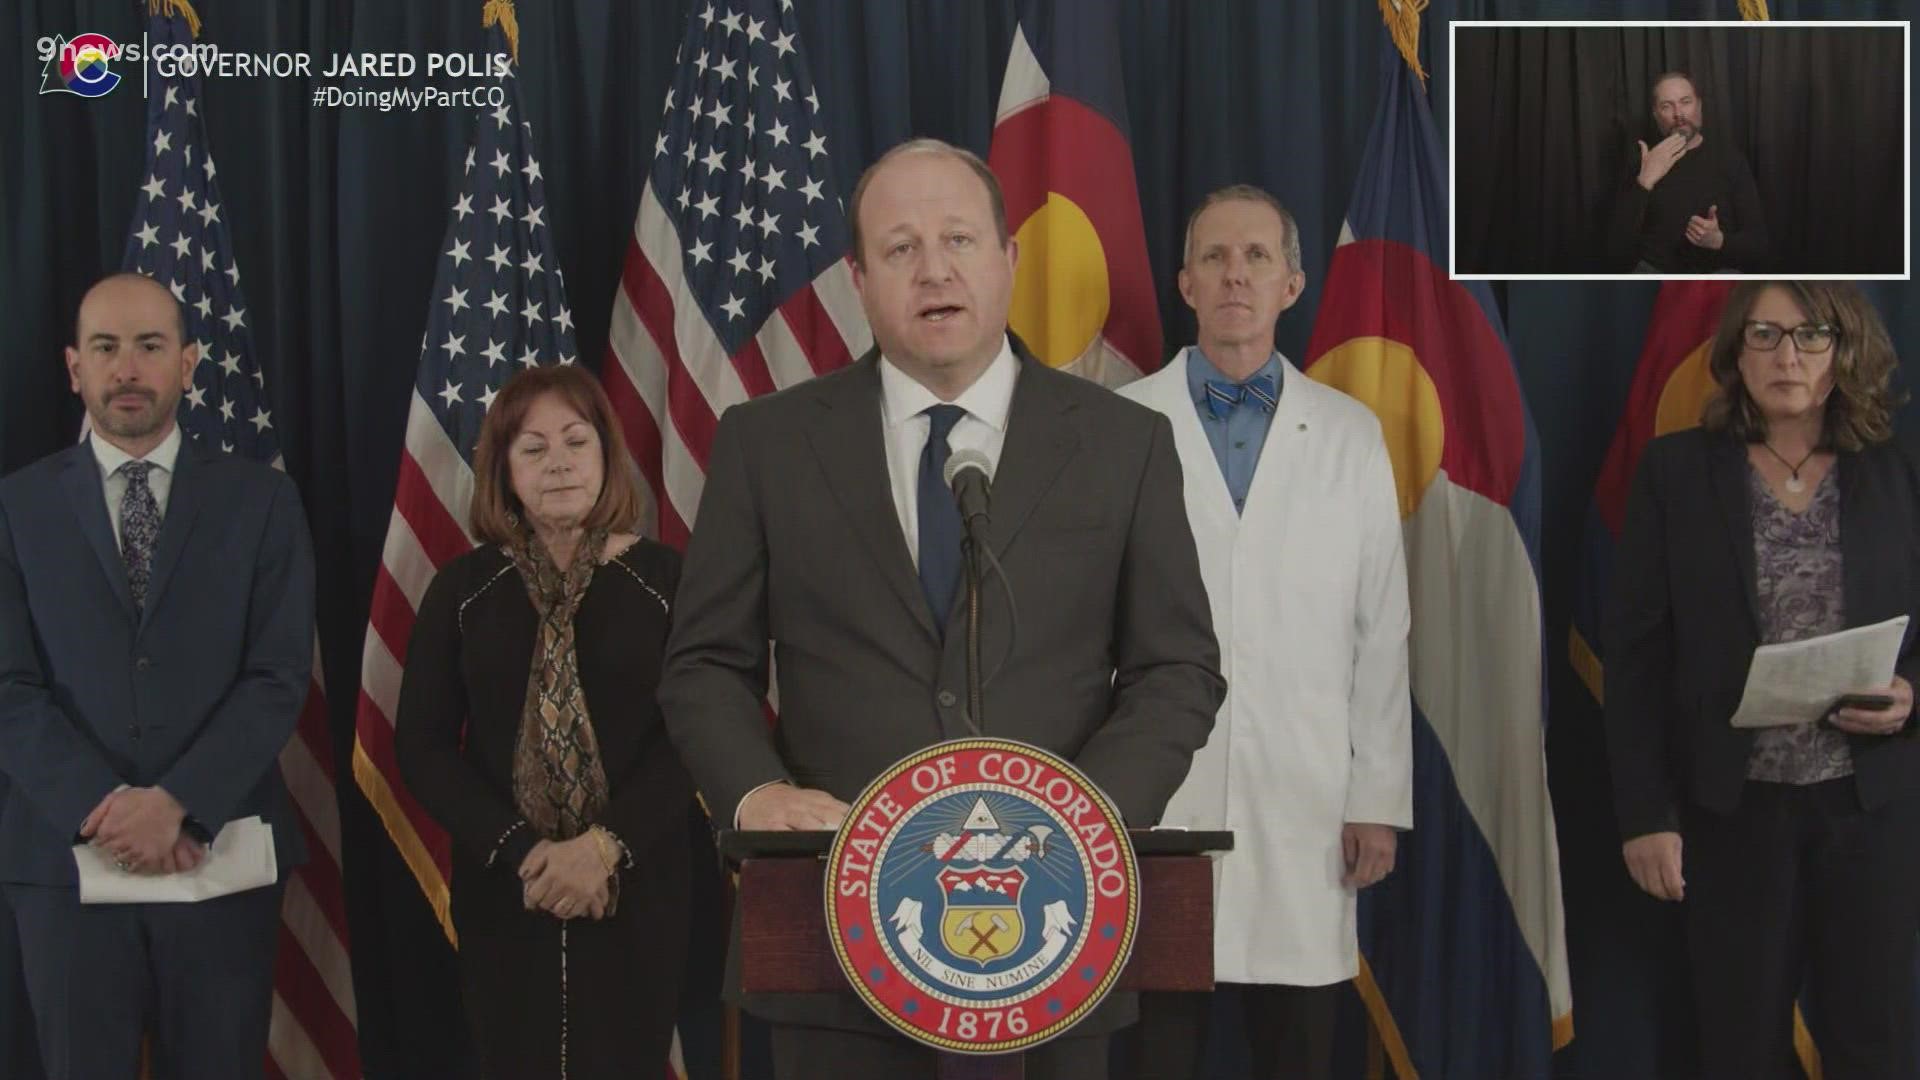 Polis talked about the "next chapter" for the state after nearly two years living through the COVID-19 pandemic